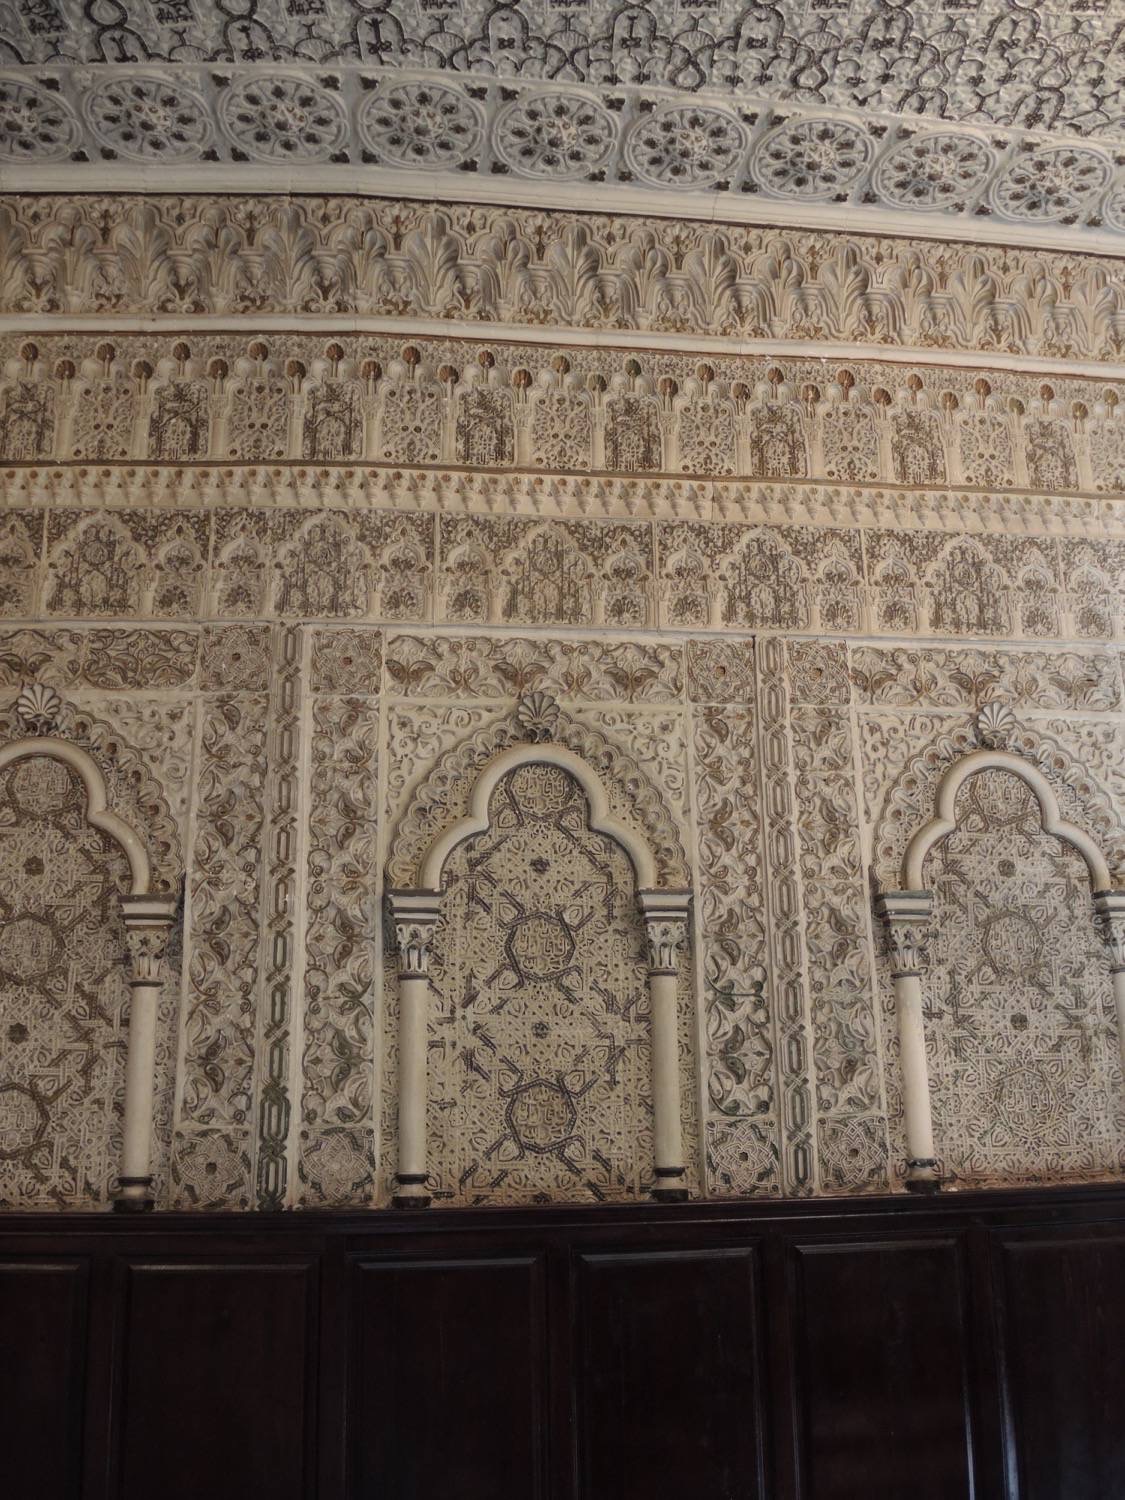 Interior view of wall